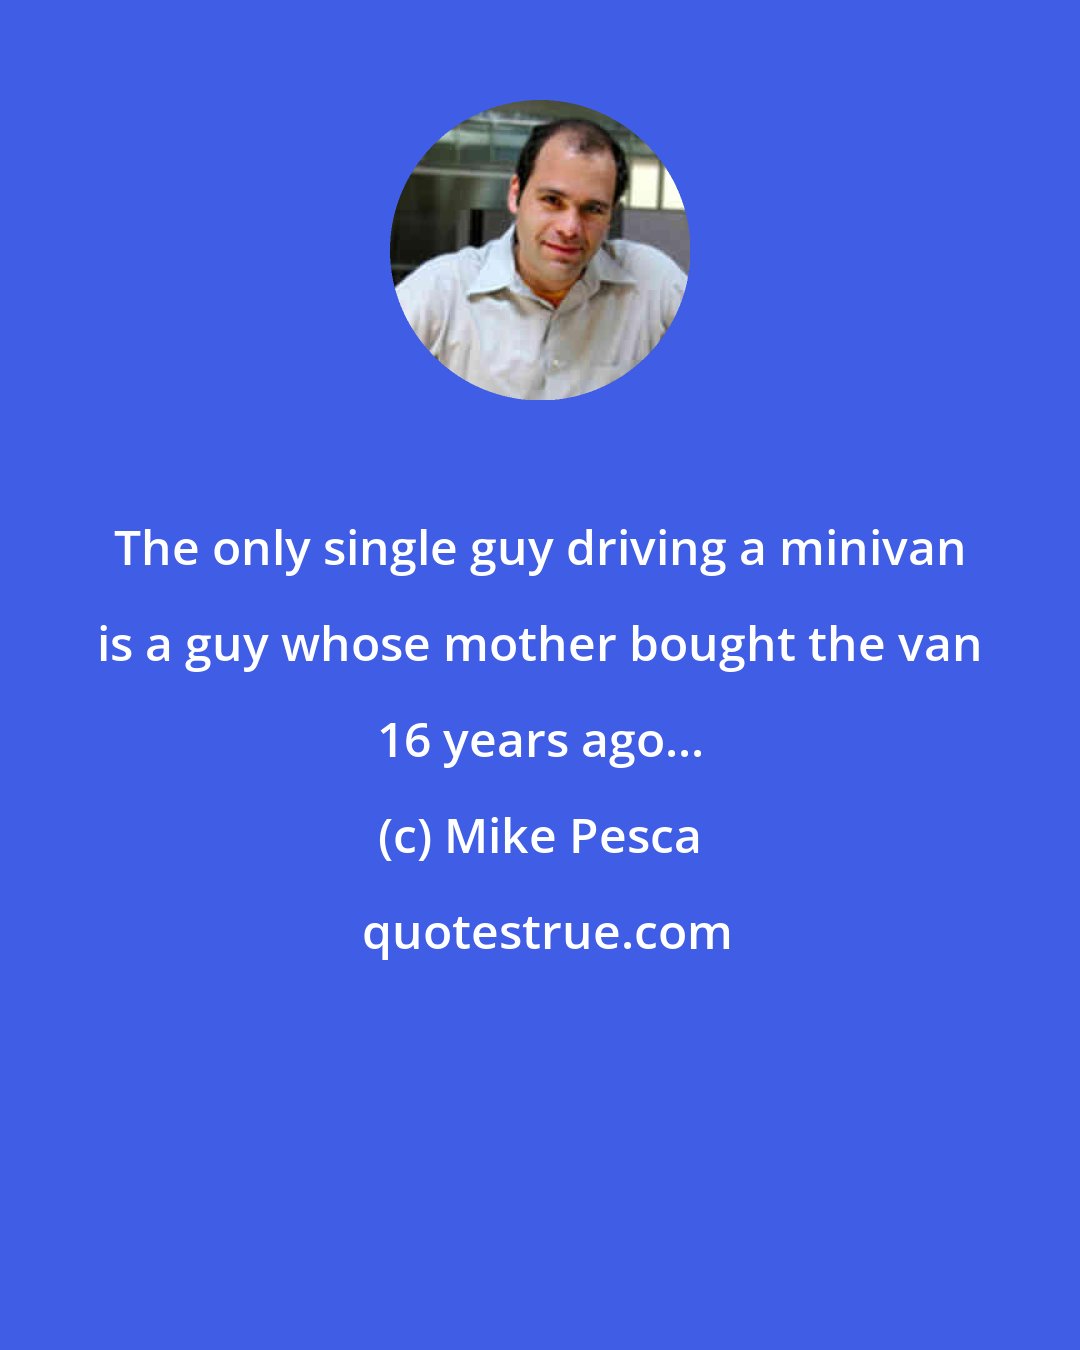 Mike Pesca: The only single guy driving a minivan is a guy whose mother bought the van 16 years ago...